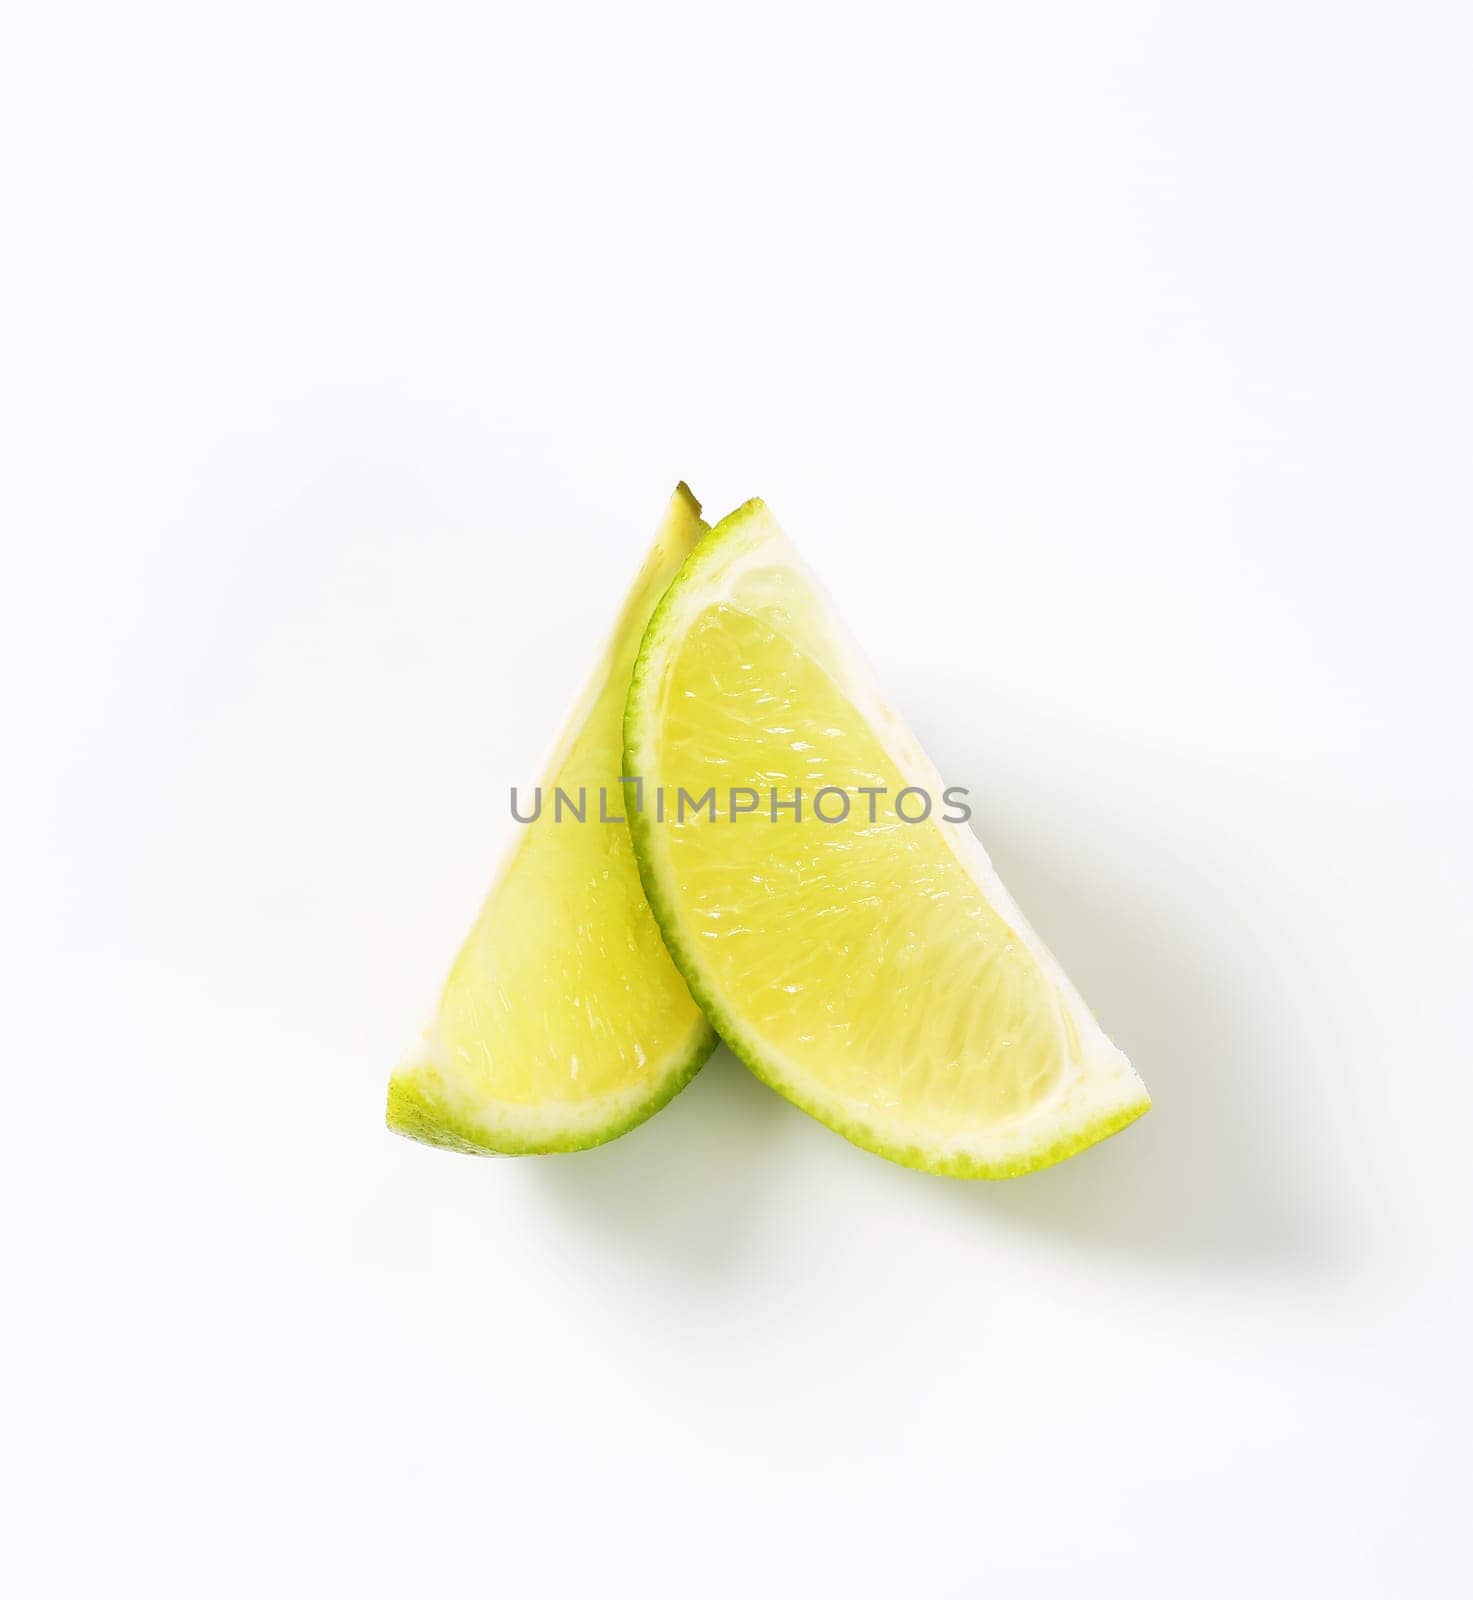 Two lime fruit wedges by Digifoodstock